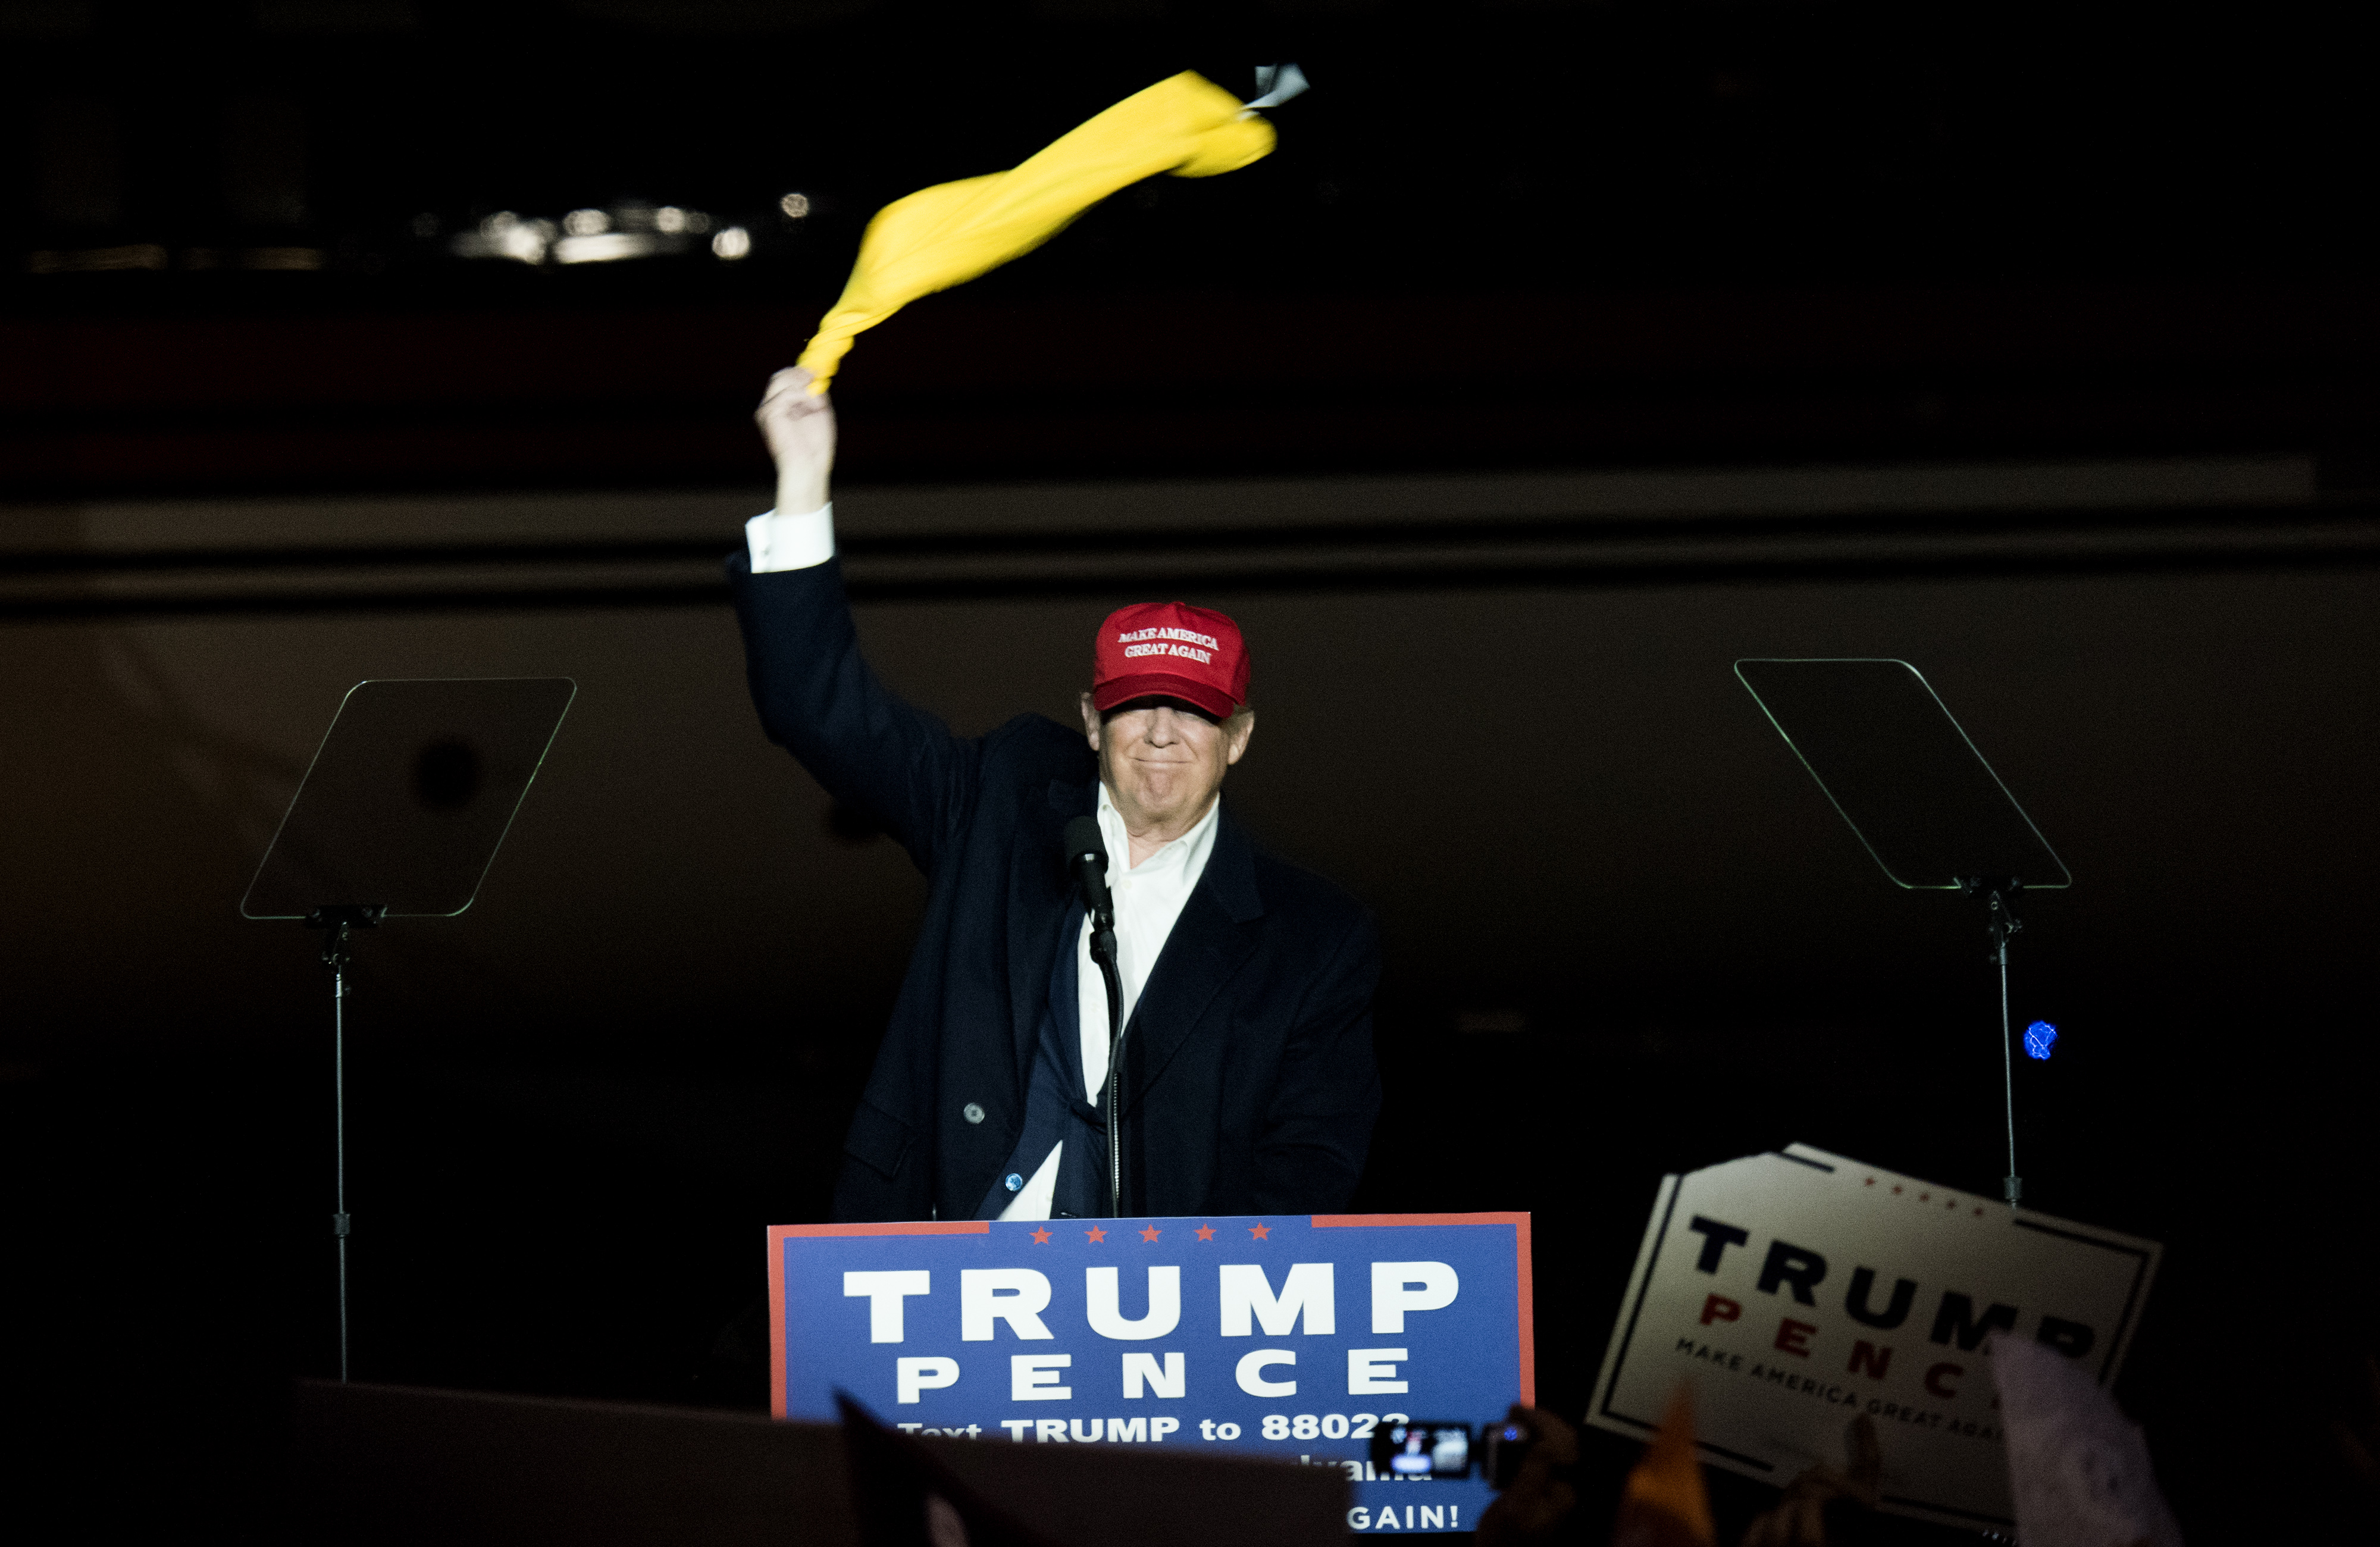 Donald Trump, 2016 Republican presidential nominee, gestures as he speaks during a campaign rally in Moon Township, Penn., on Nov. 6, 2016. (Bloomberg via Getty Images)